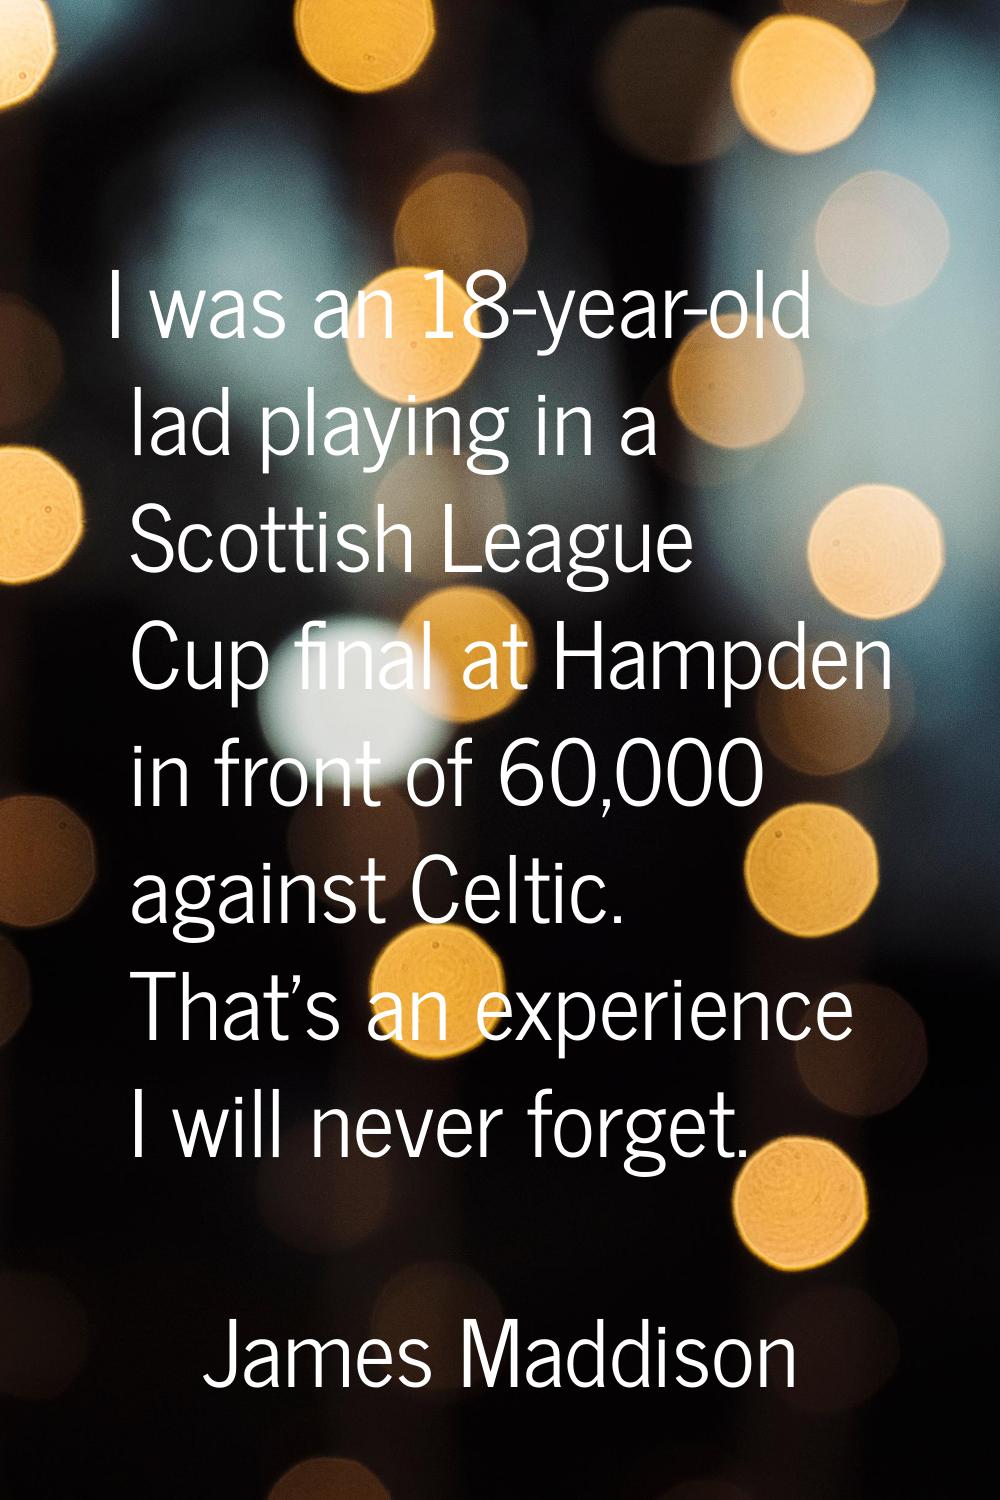 I was an 18-year-old lad playing in a Scottish League Cup final at Hampden in front of 60,000 again